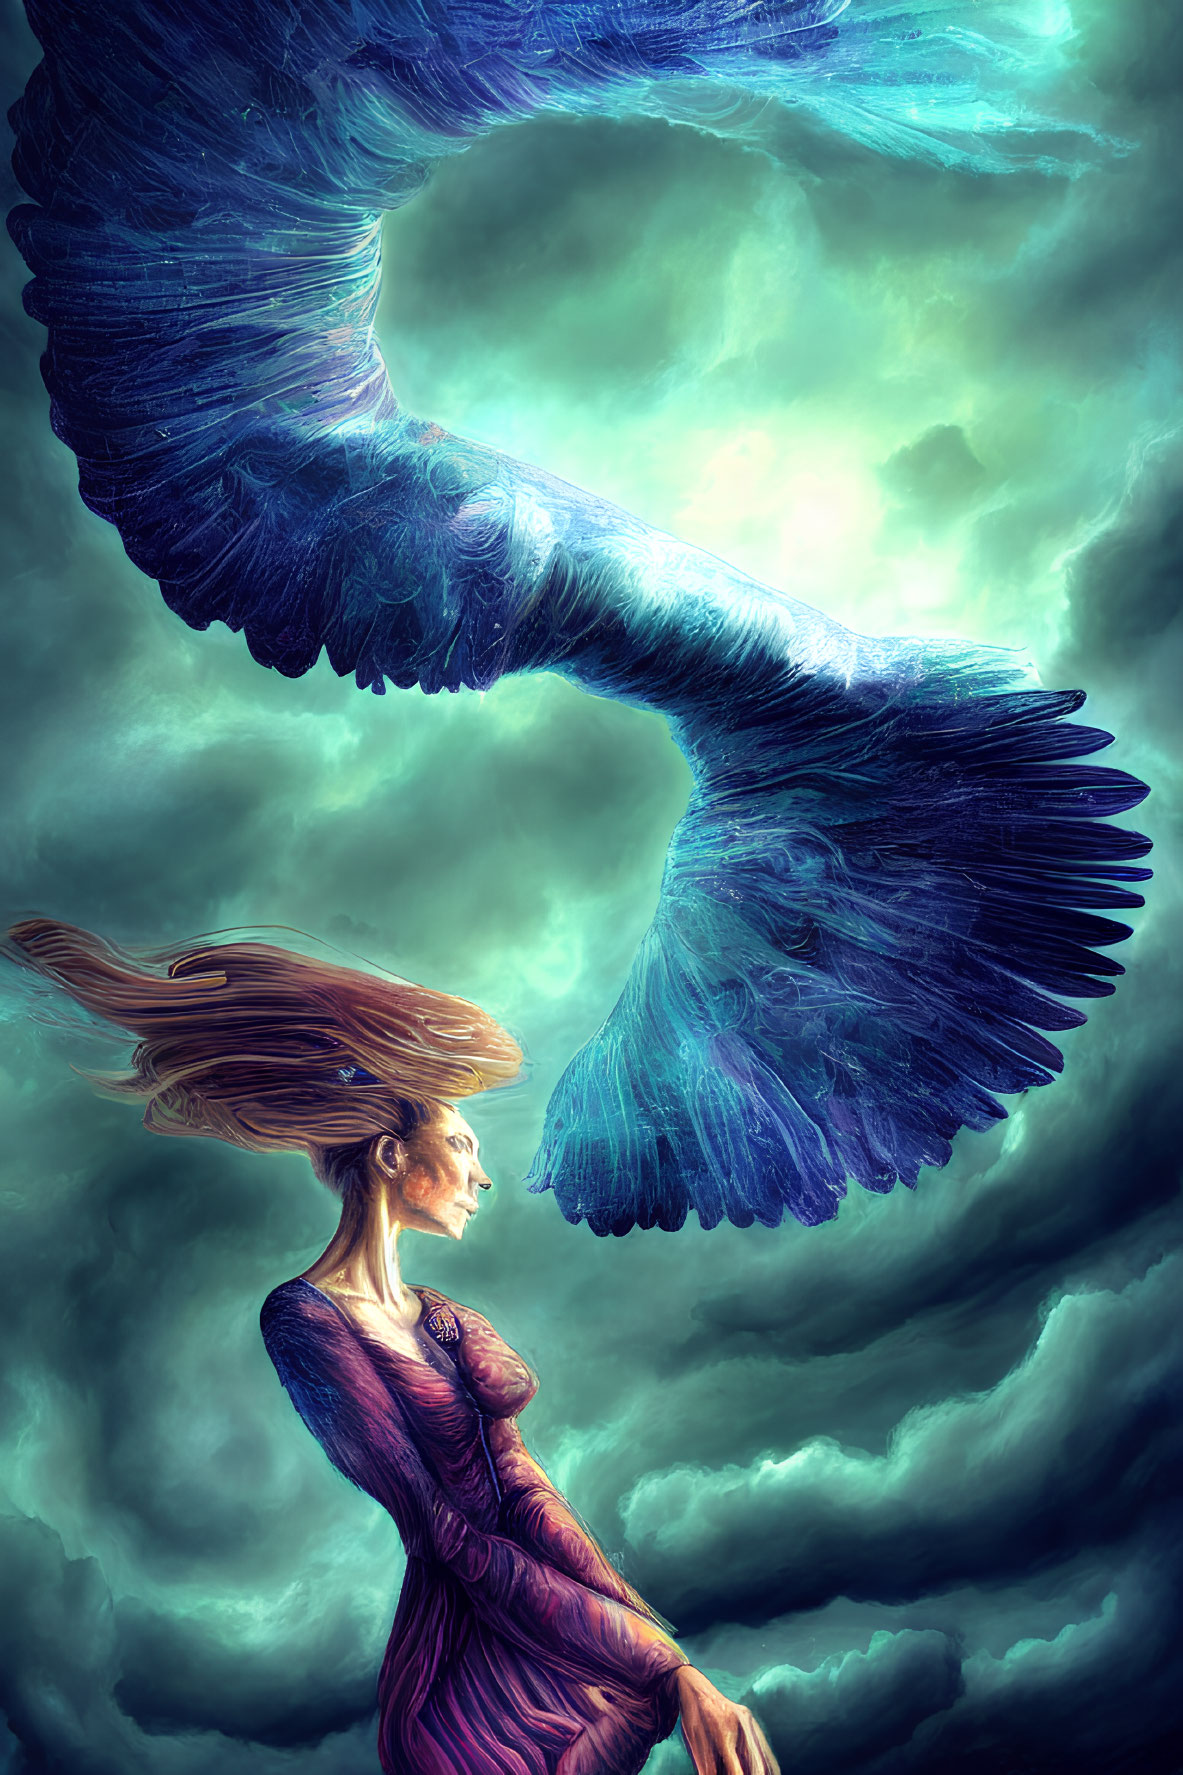 Woman with flowing hair and giant wings gazing at turbulent sky